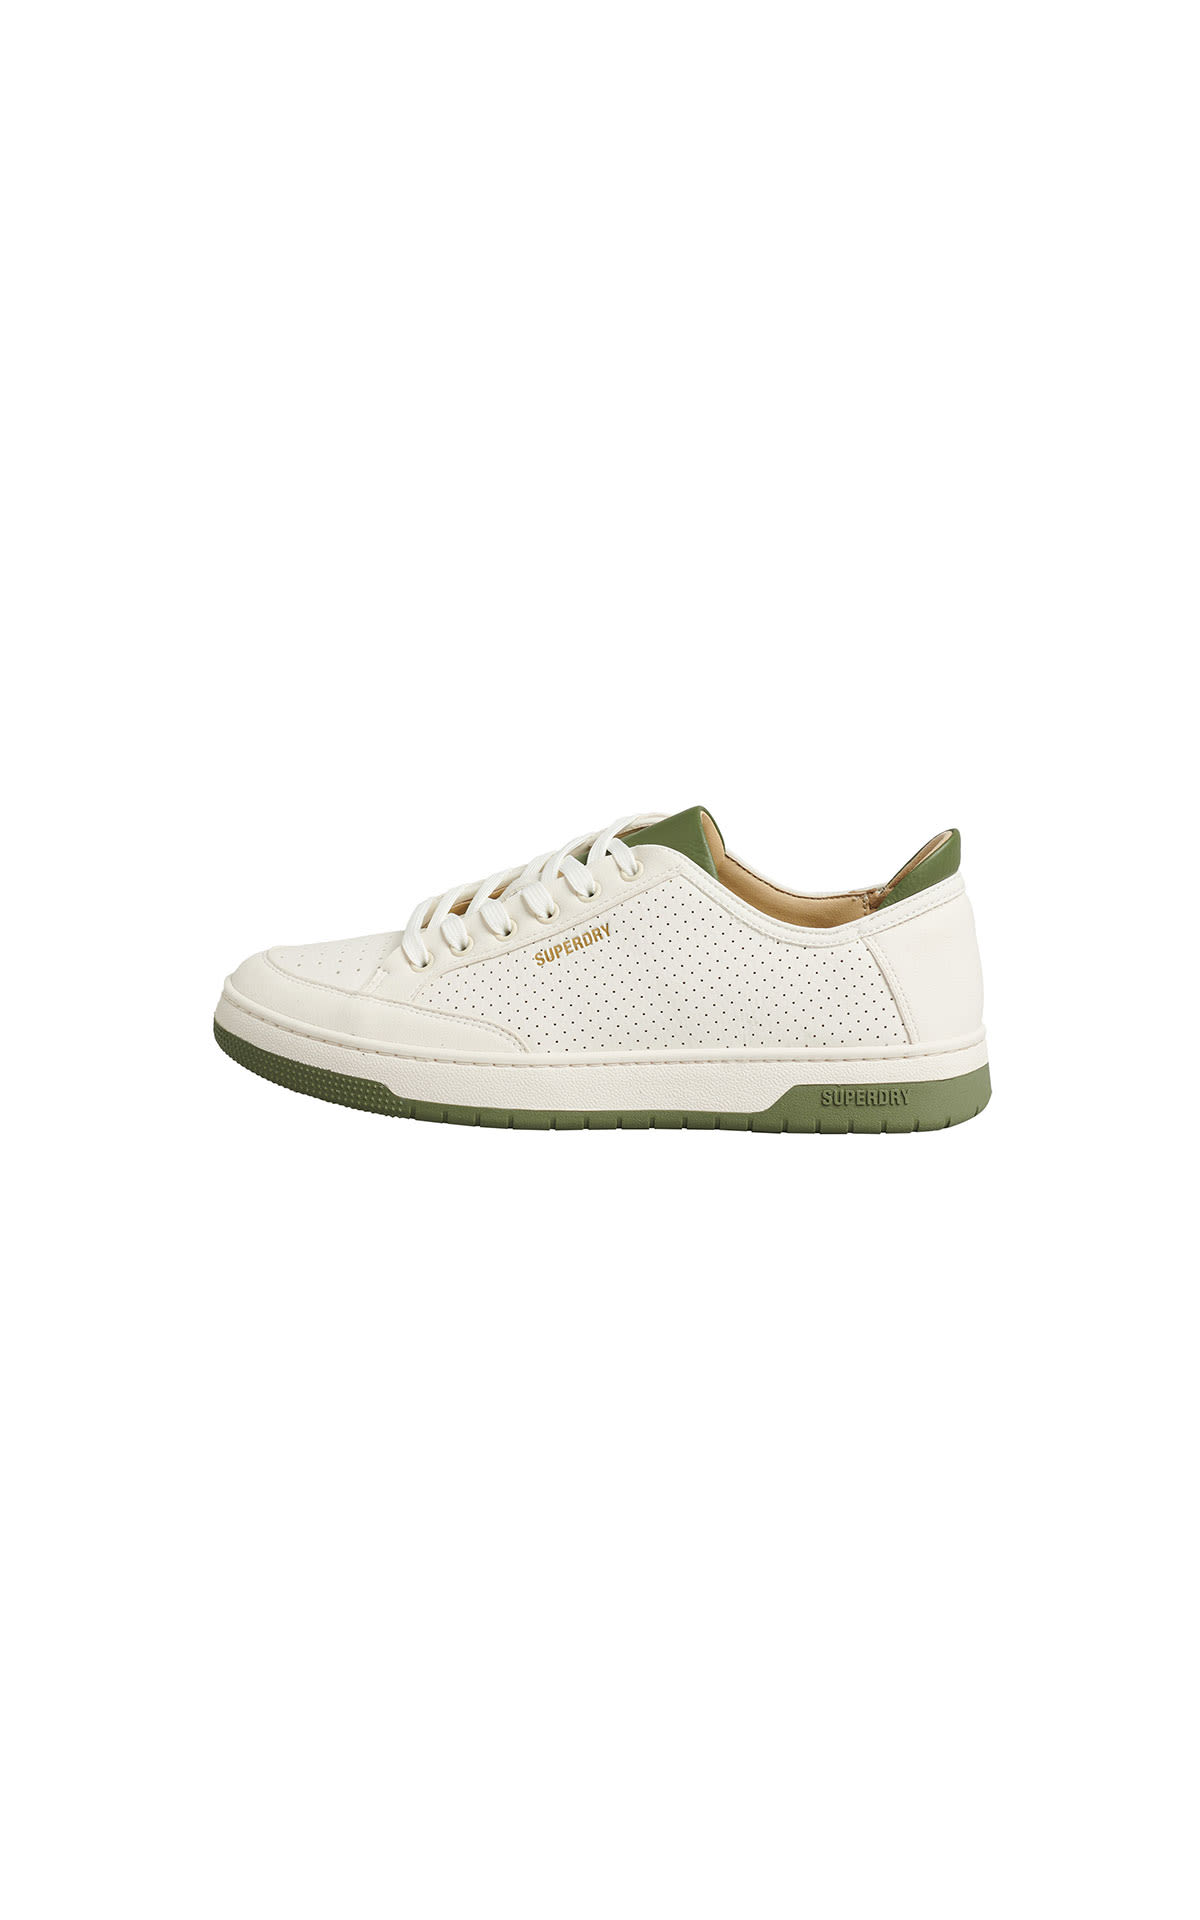 Superdry Vintage white and green trainers womens from Bicester Village